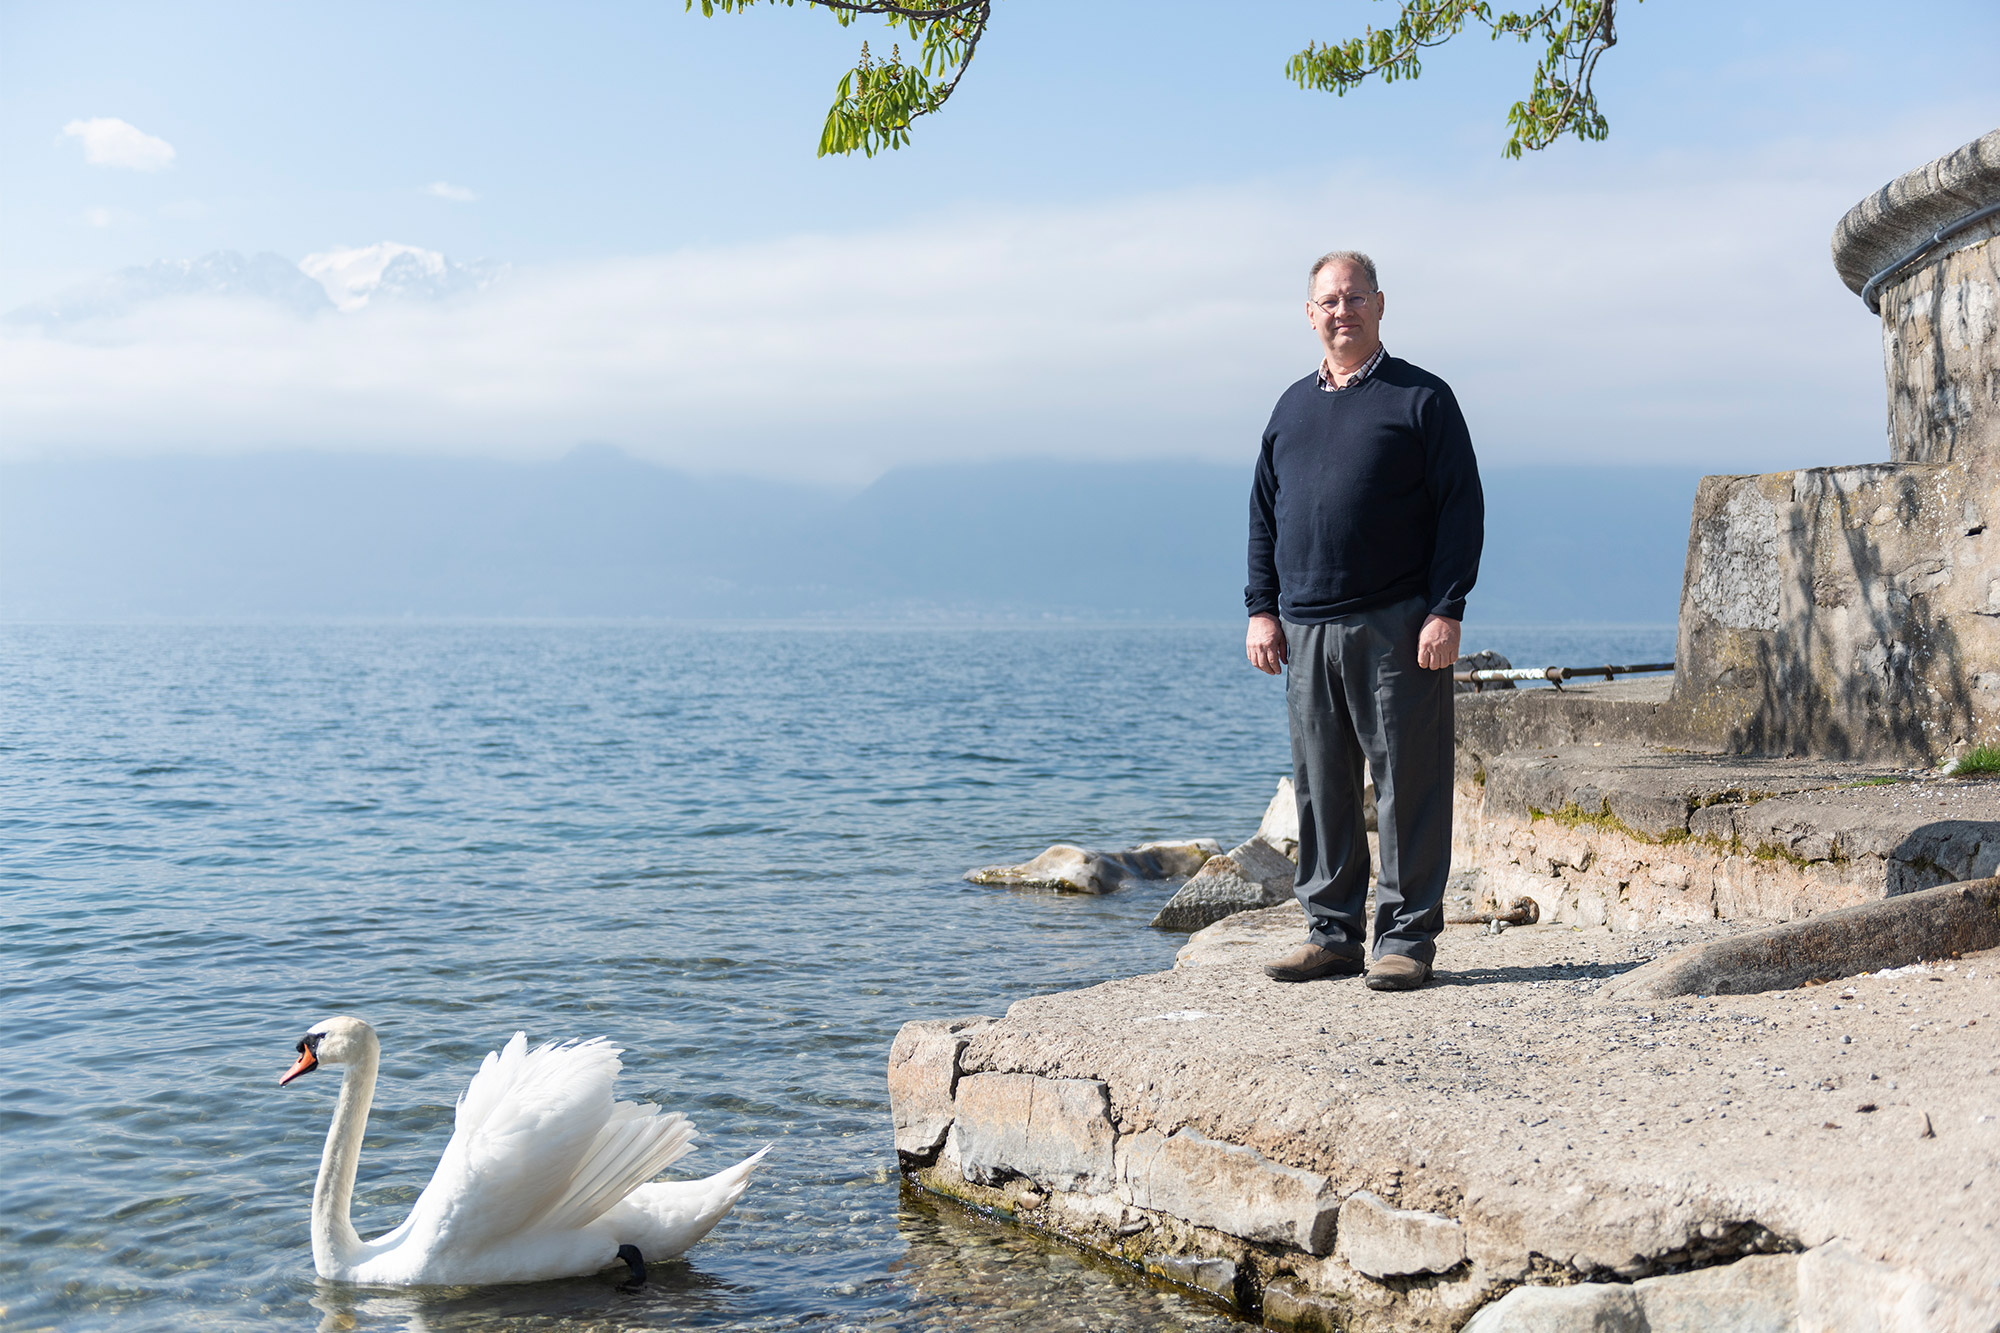 A photo of Jay Comfort standing for a photograph by the water as a swan swims nearby.